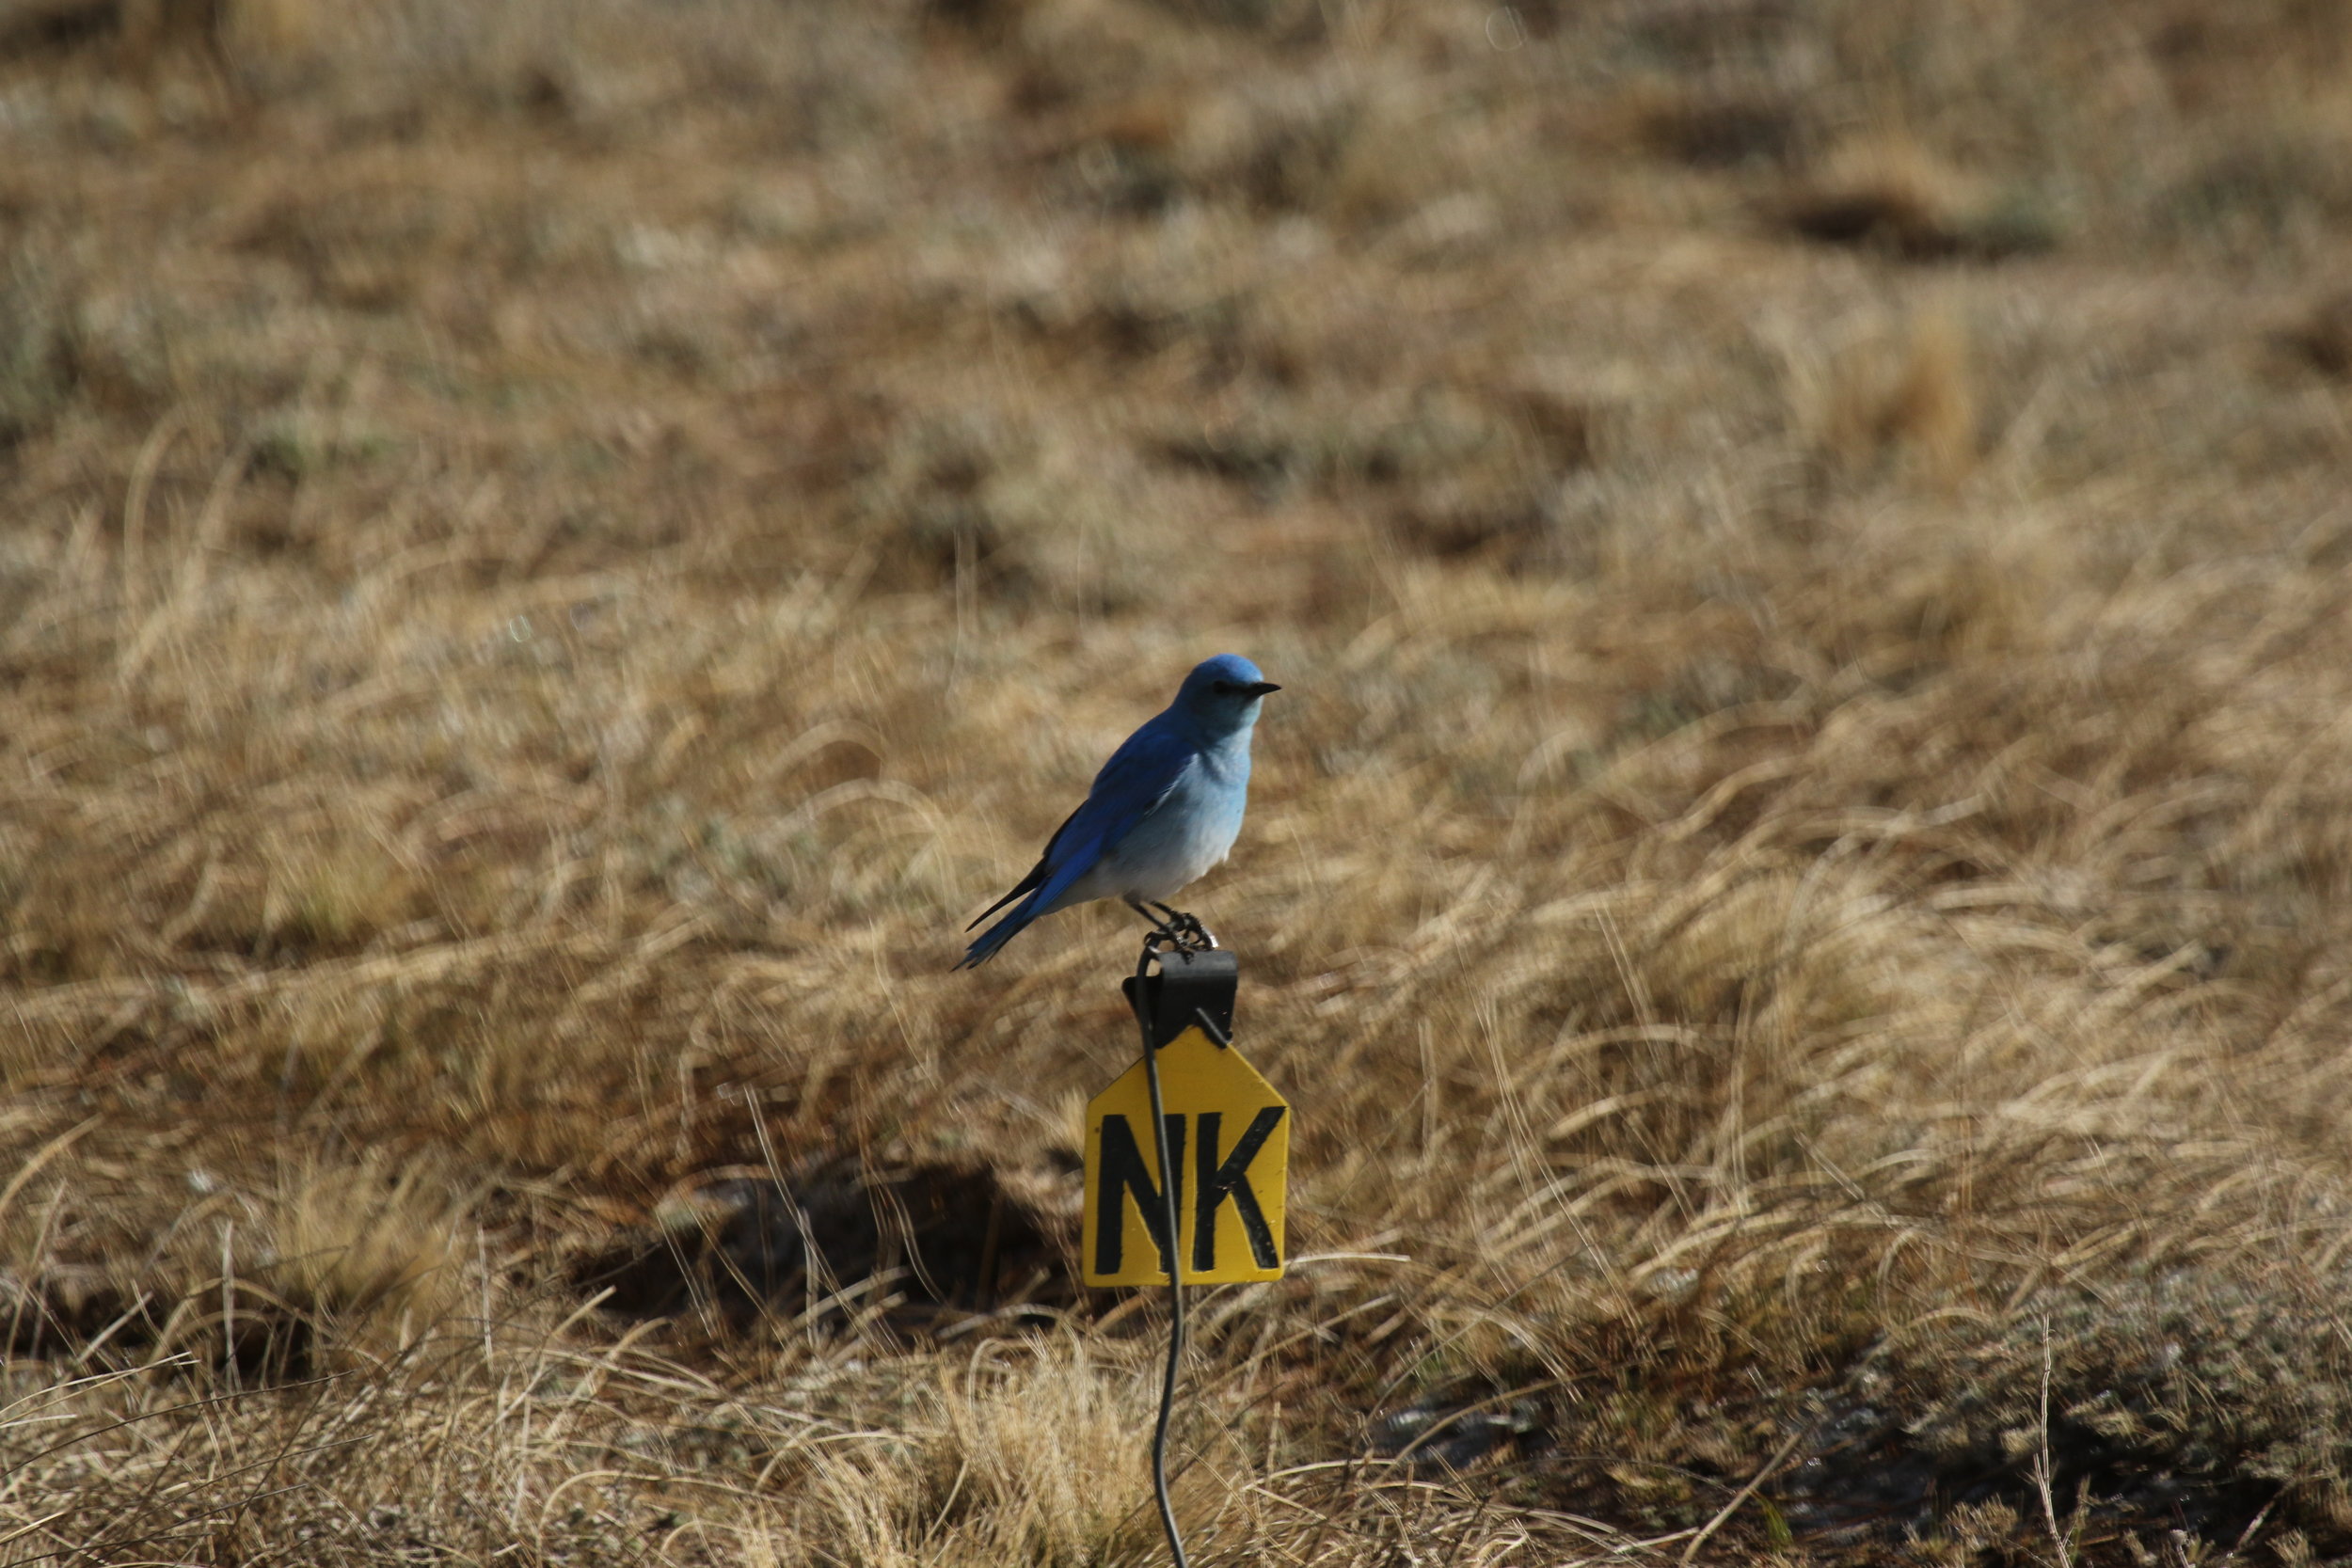  Juvenile prairie dogs will often be startled by swooping songbirds like this mountain bluebird, being hypersensitive to their new surroundings.  ©MRR 2017  